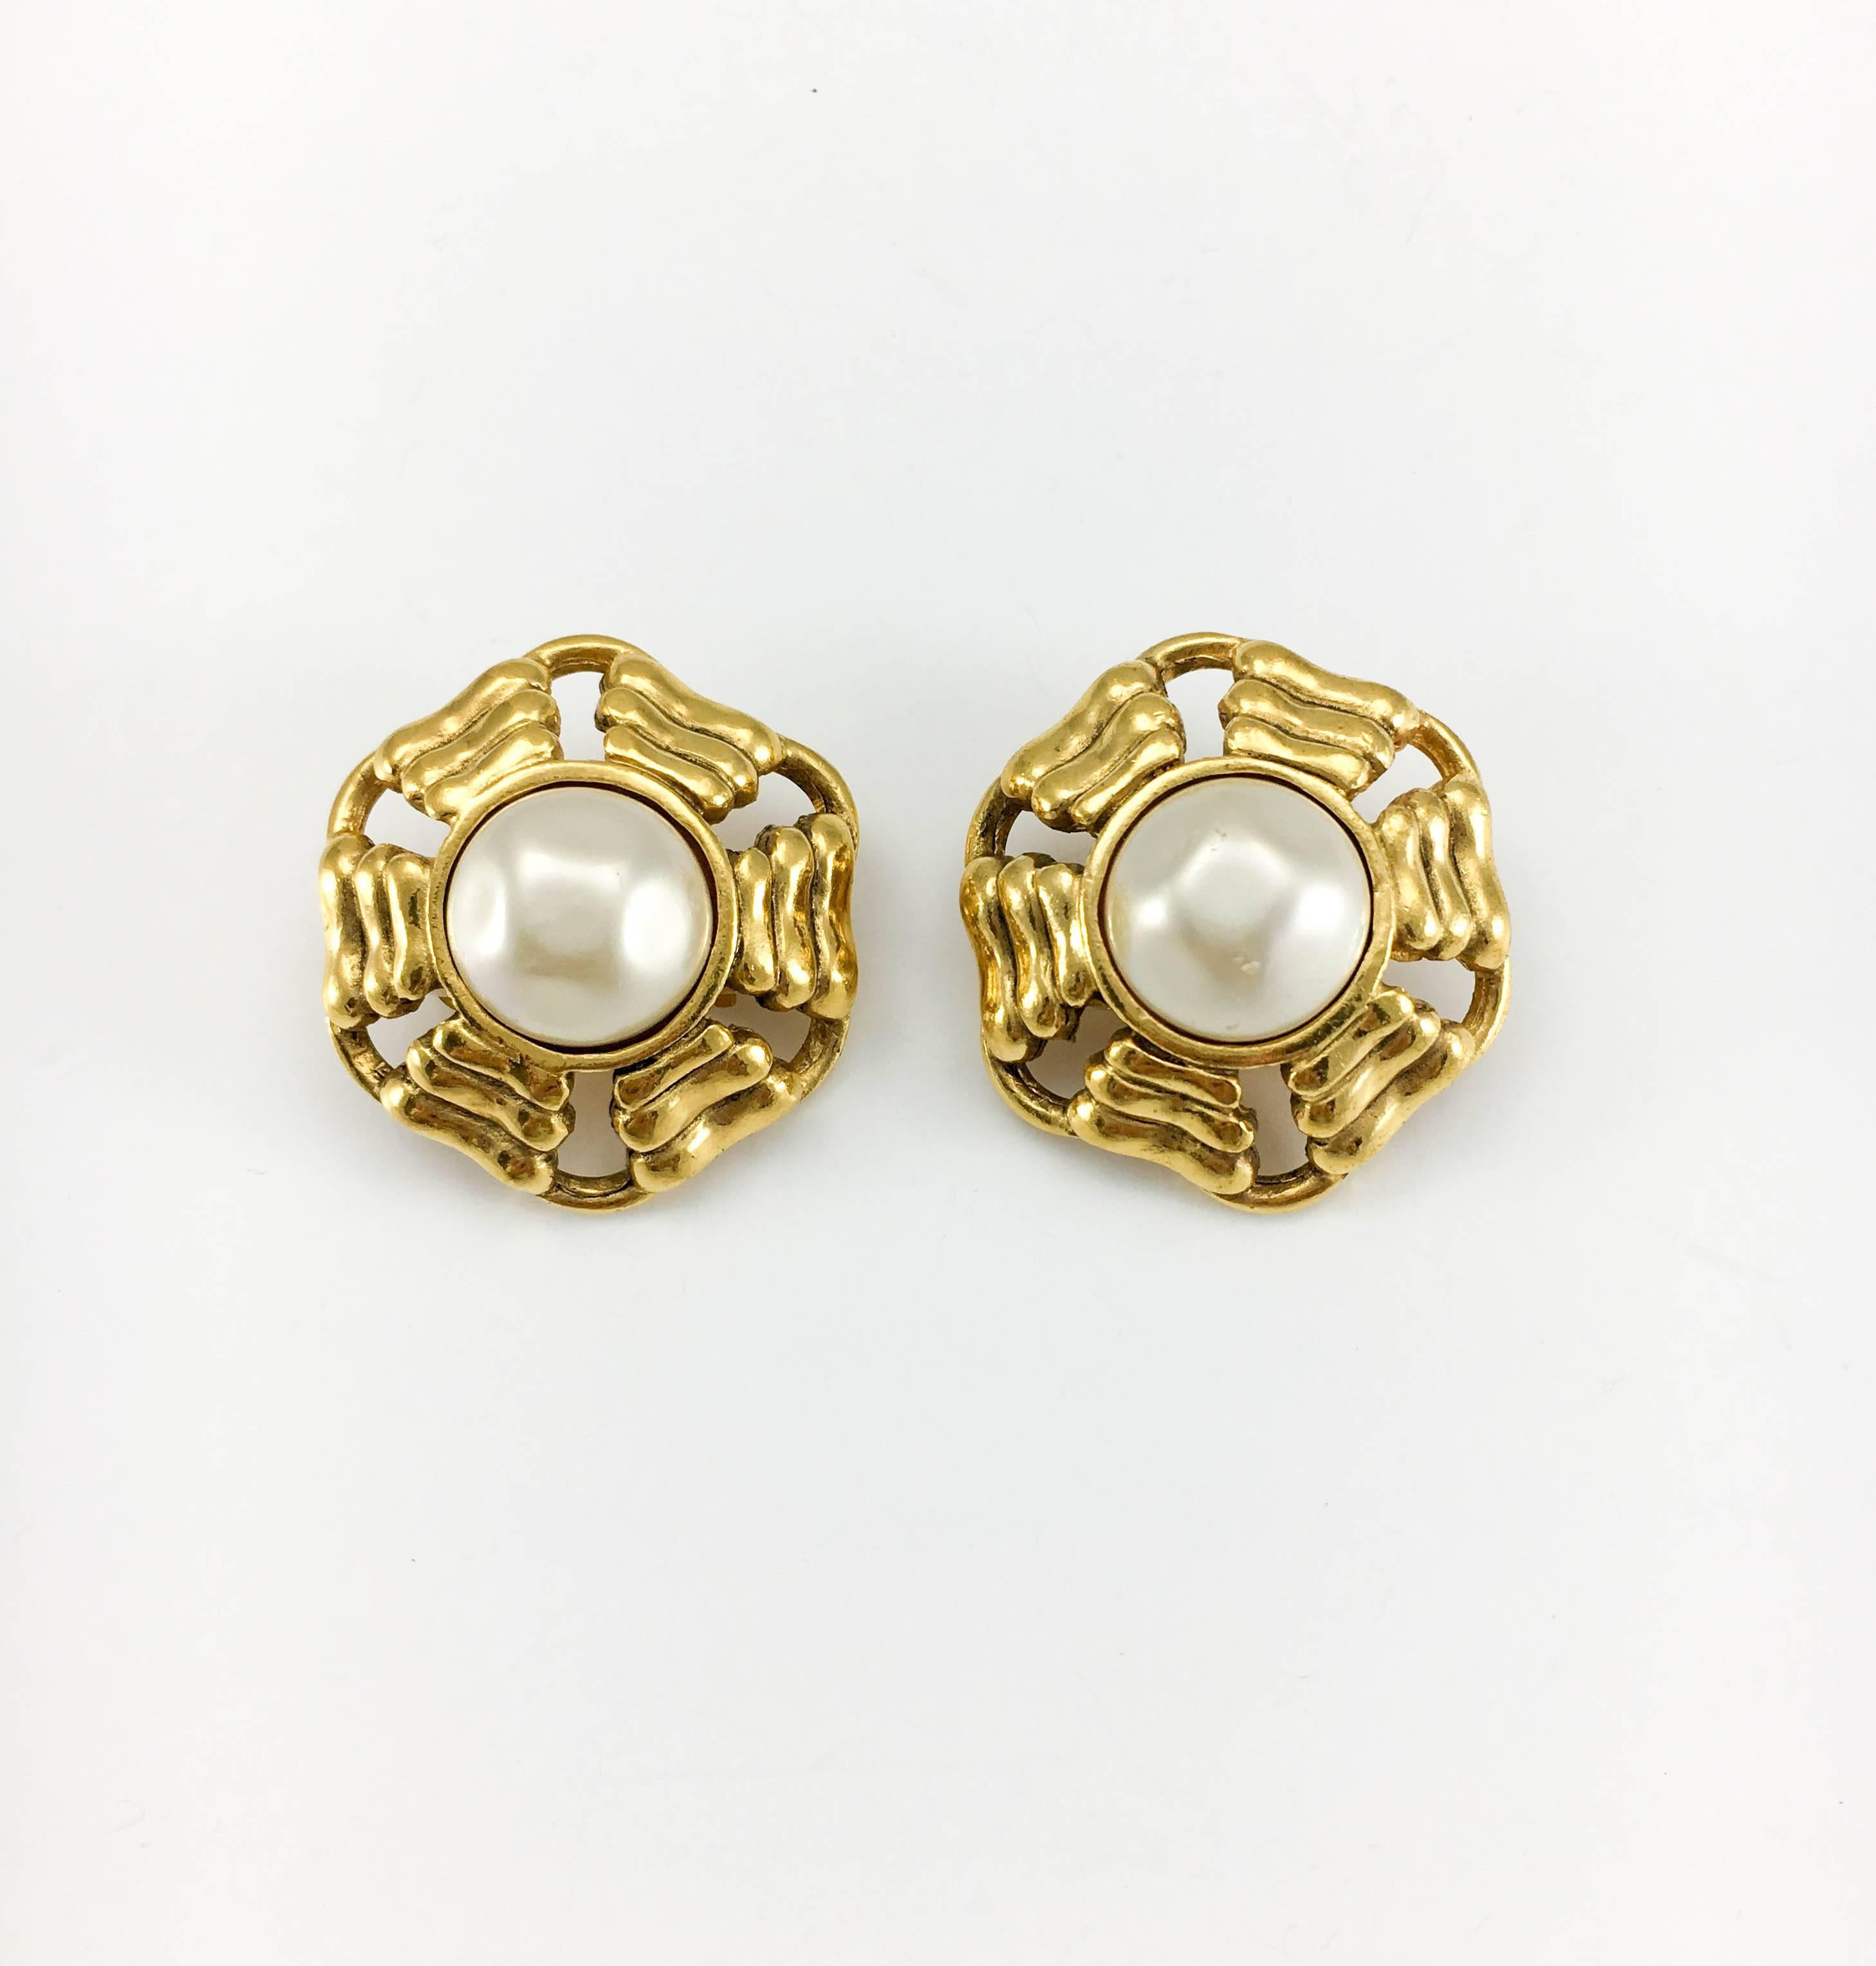 Vintage Chanel Pearl Gold-Plated Clip-on Earrings. A pair of Chanel earrings dating back from the 1980’s. Gold-plated, the round design is complimented by a faux pearl cabochon in the centre. Chanel signed on the back. Bringing the class and style